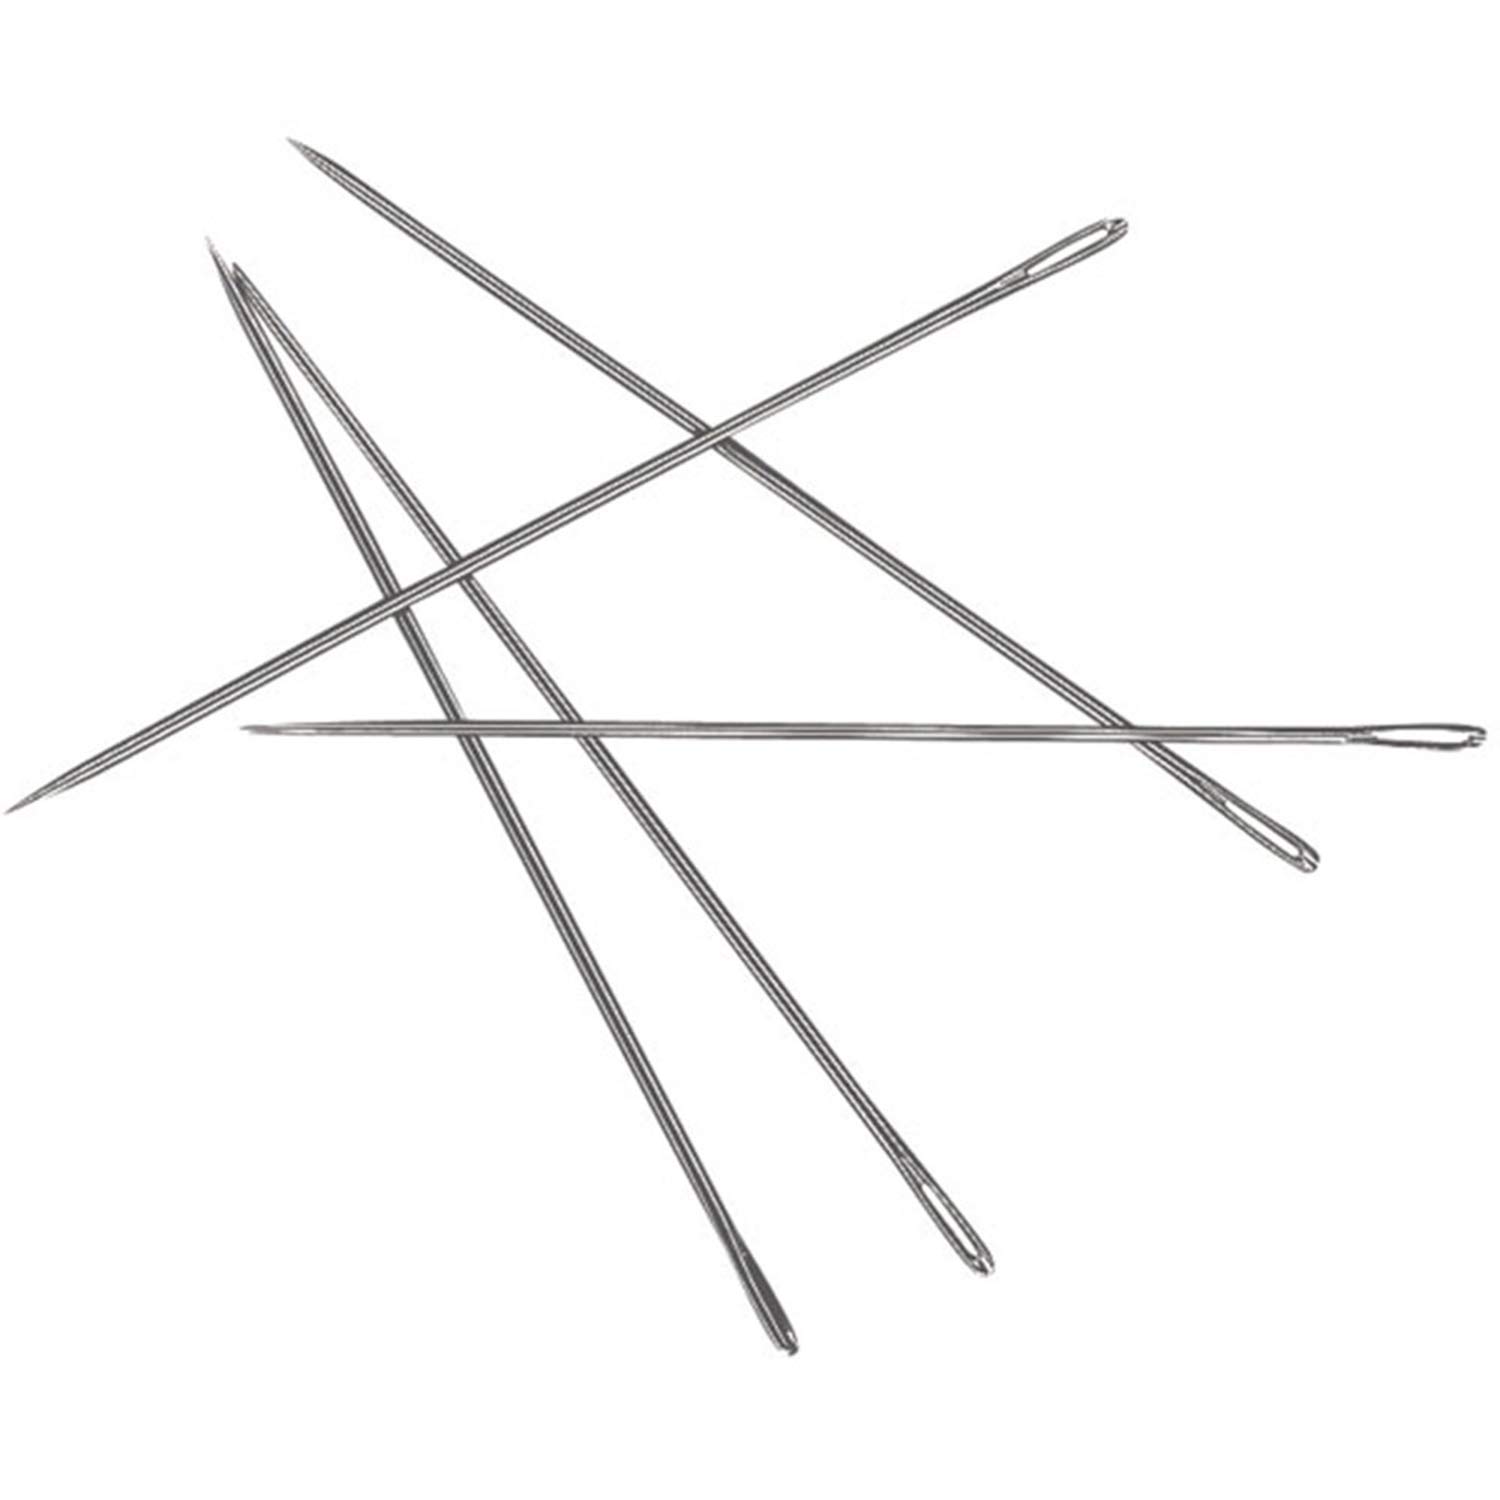 Lineco Book Binding Stainless Steel Needles, Ideally for Sewing Books and Slightly Blunt Point to Reduce Snagging, Perfect Length (Pack of 1)